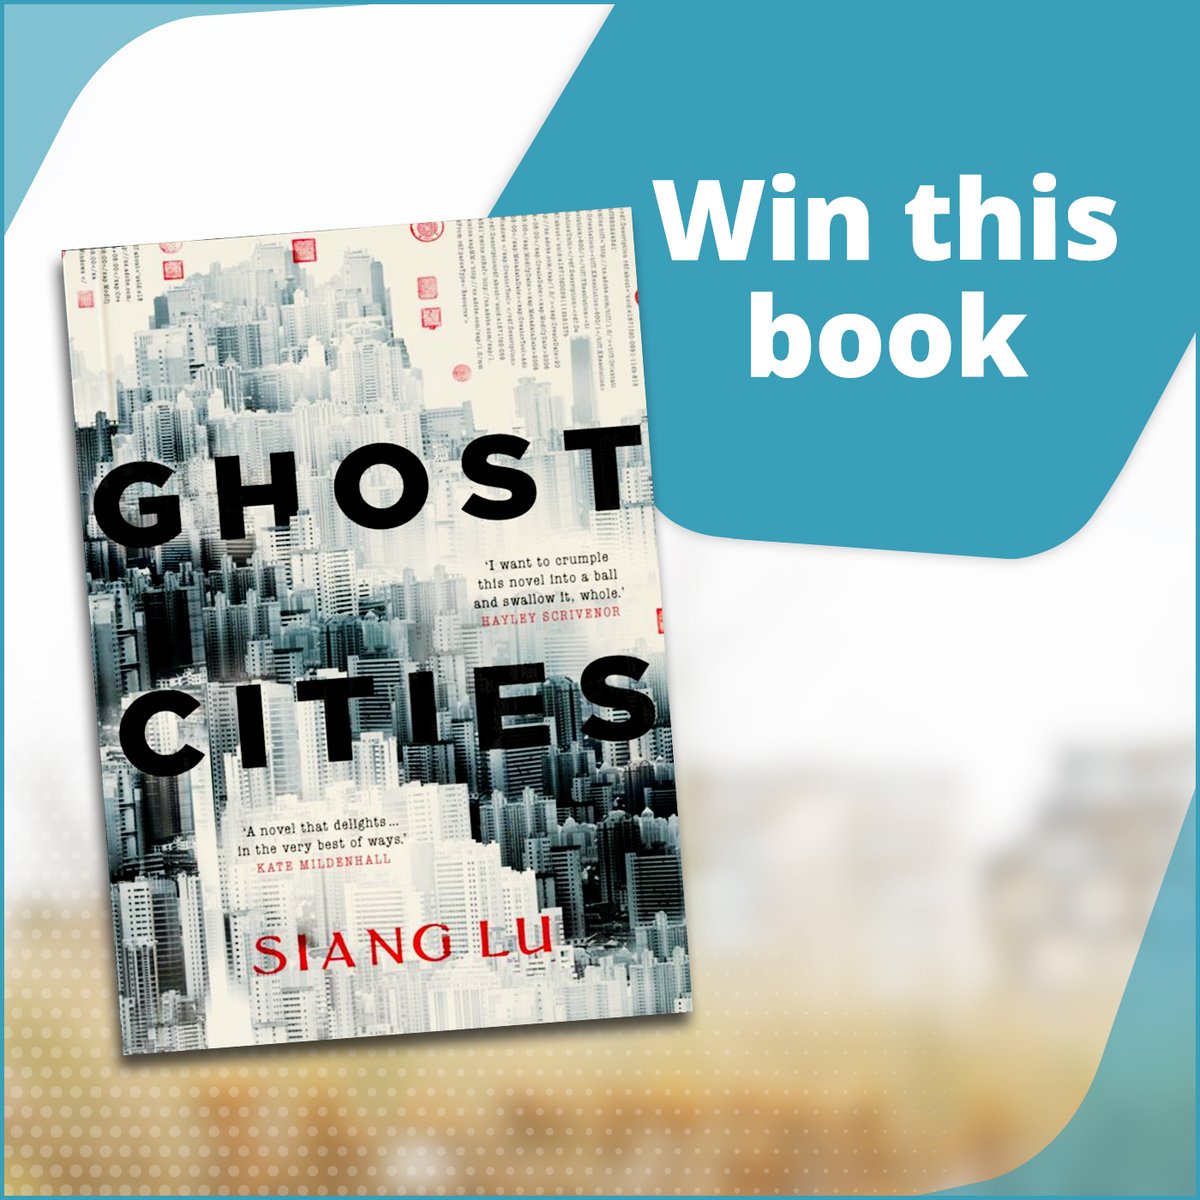 WIN THIS BOOK – This week, we’re giving away three copies of Ghost Cities by Siang Lu, author of The Whitewash, and the co-creator of The Beige Index. To win, enter here: writerscentre.com.au/win